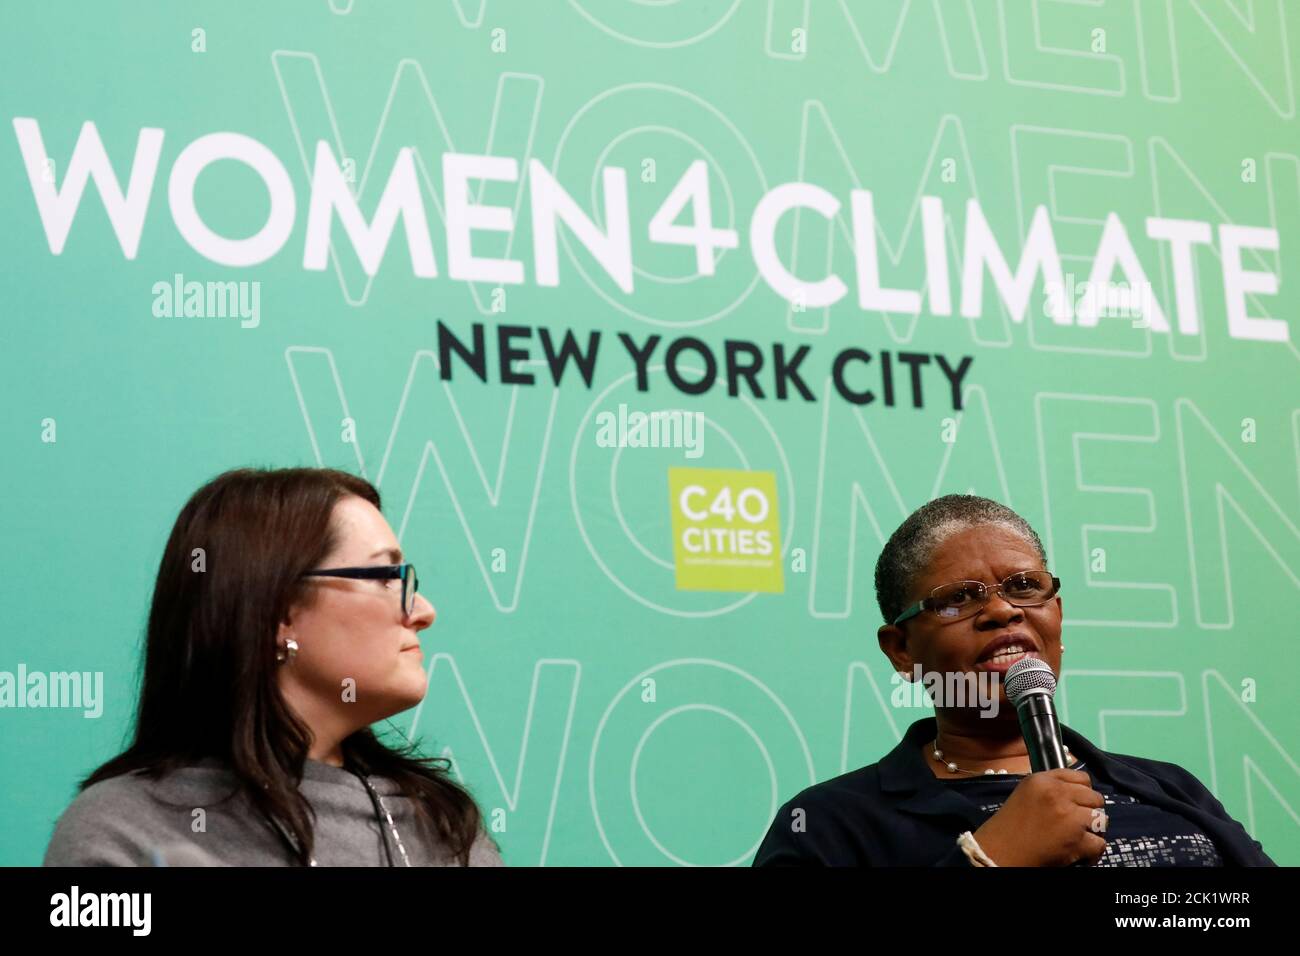 Durban Mayor Zandile Gumede speaks during the C40 Cities Women4Climate event in New York City, U.S., March 15, 2017. REUTERS/Brendan McDermid Stock Photo